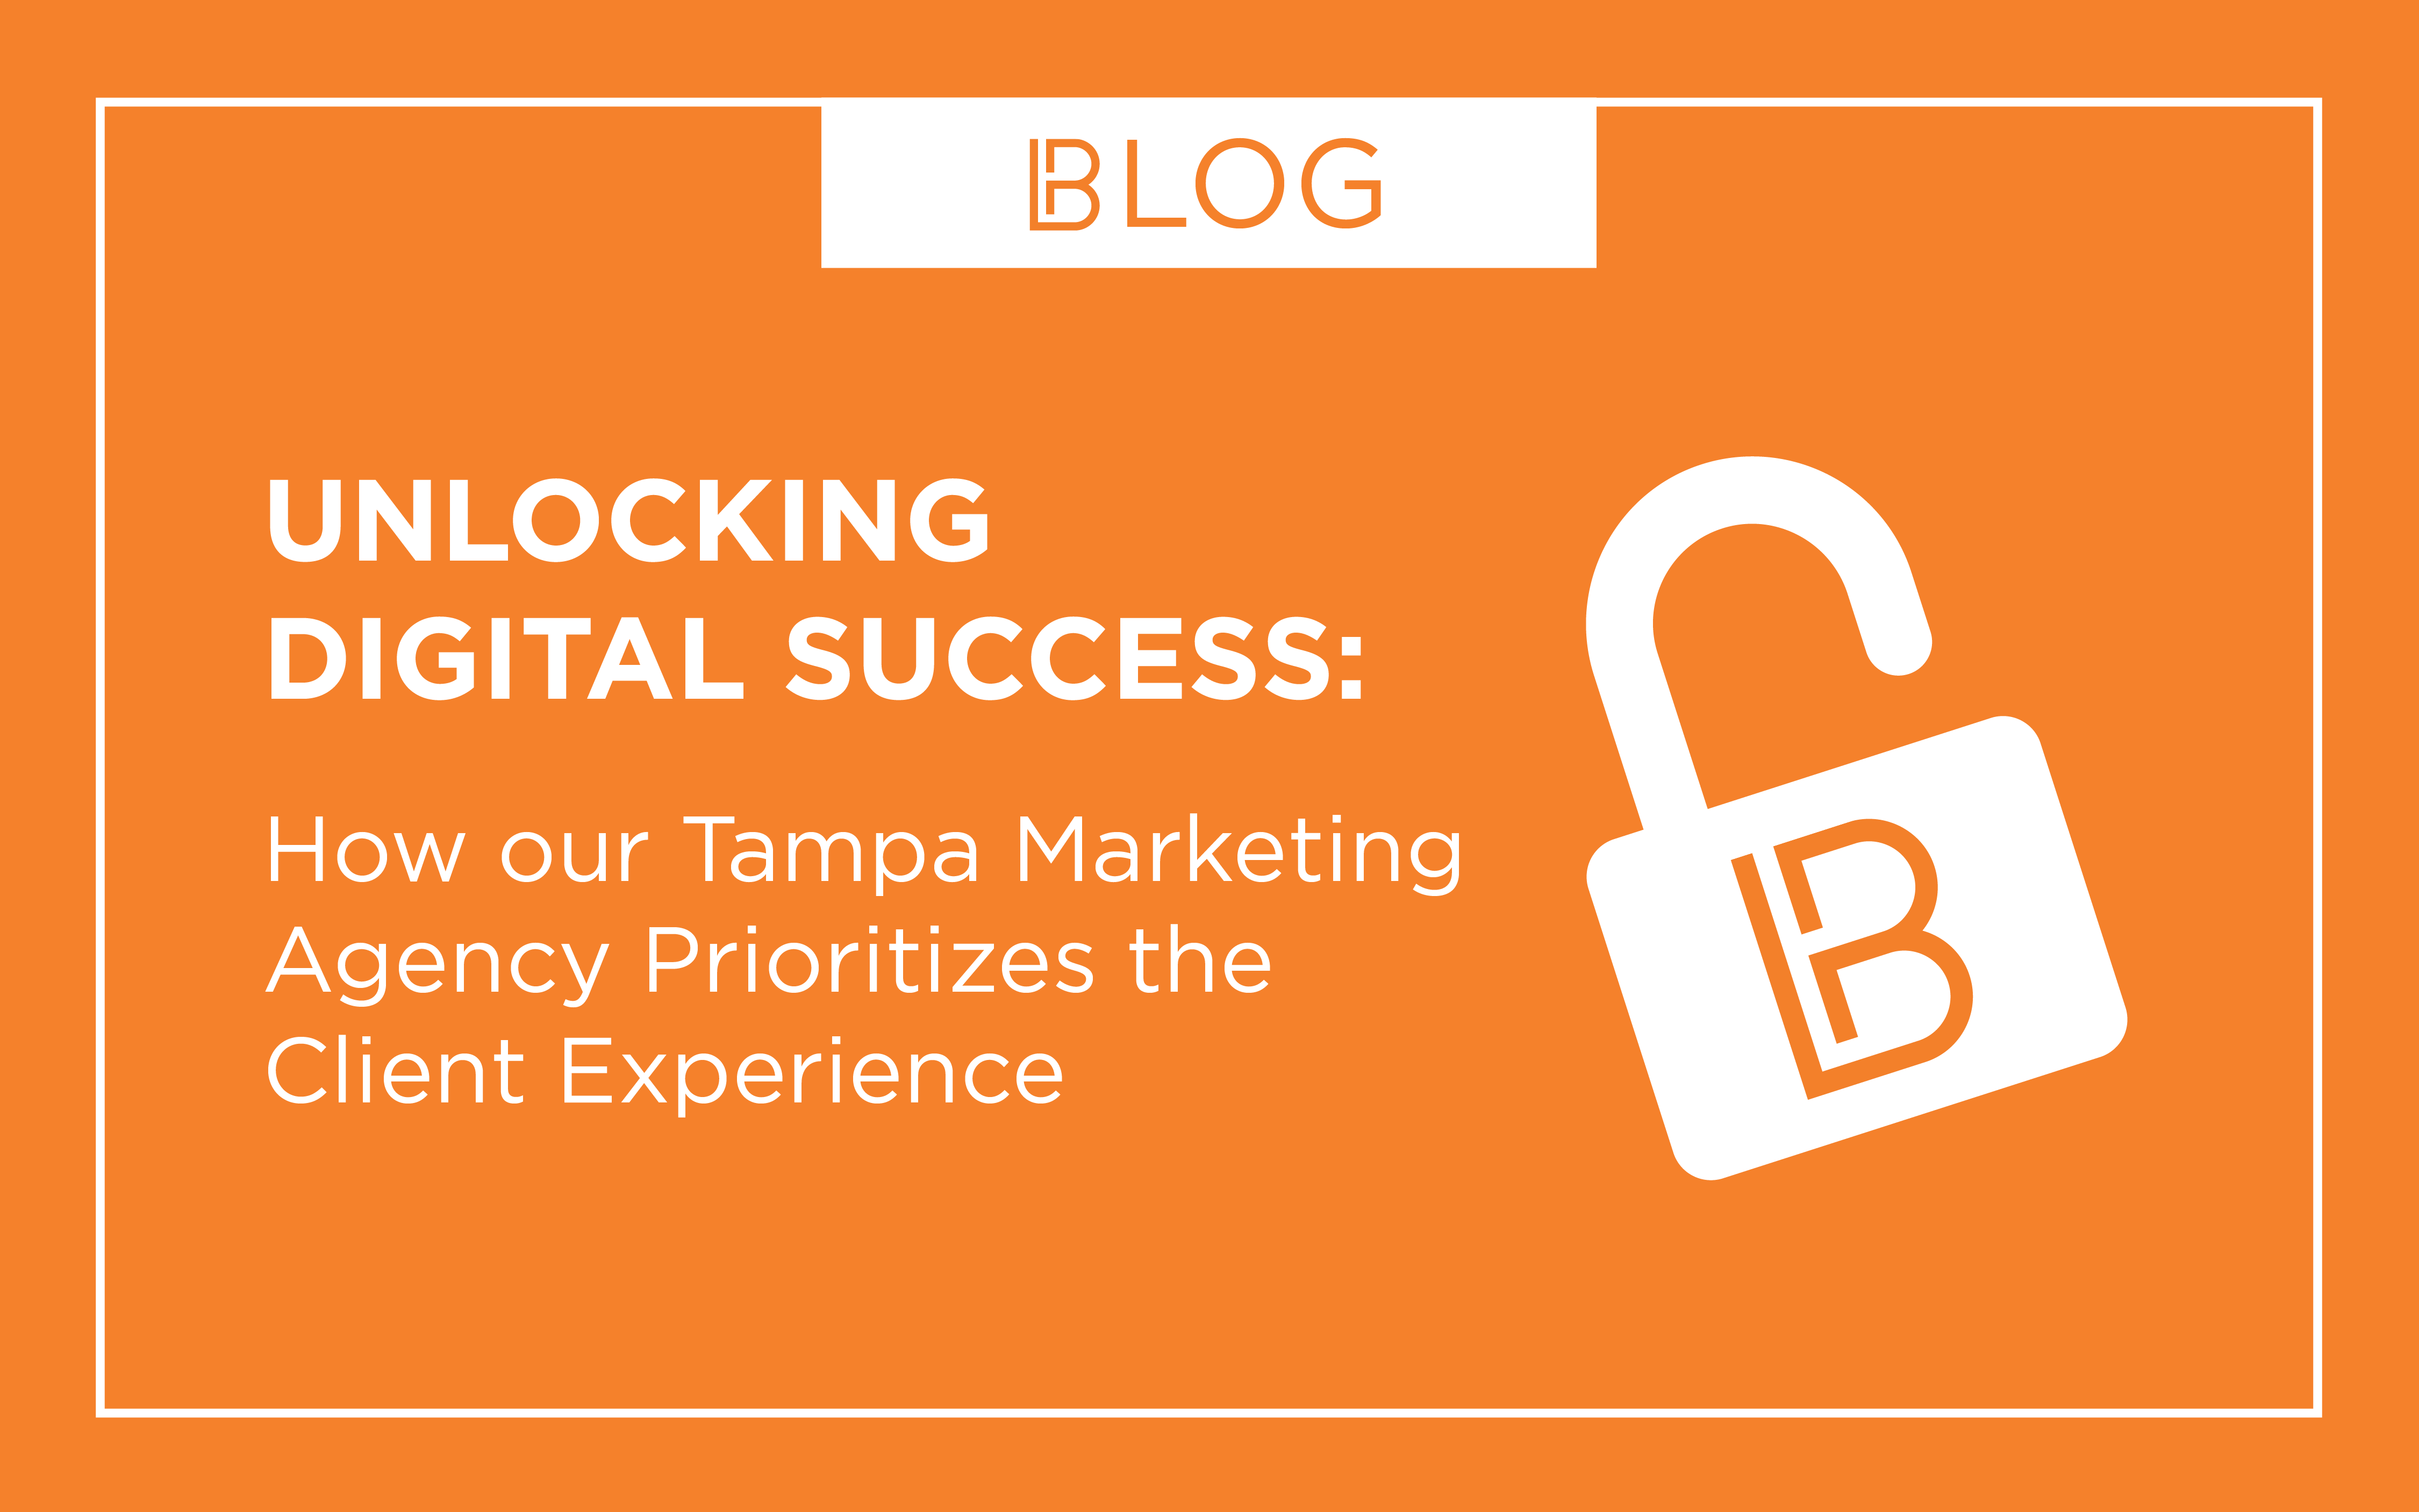 Unlocking Digital Success: How Our Tampa Marketing Agency Prioritizes the Client Experience